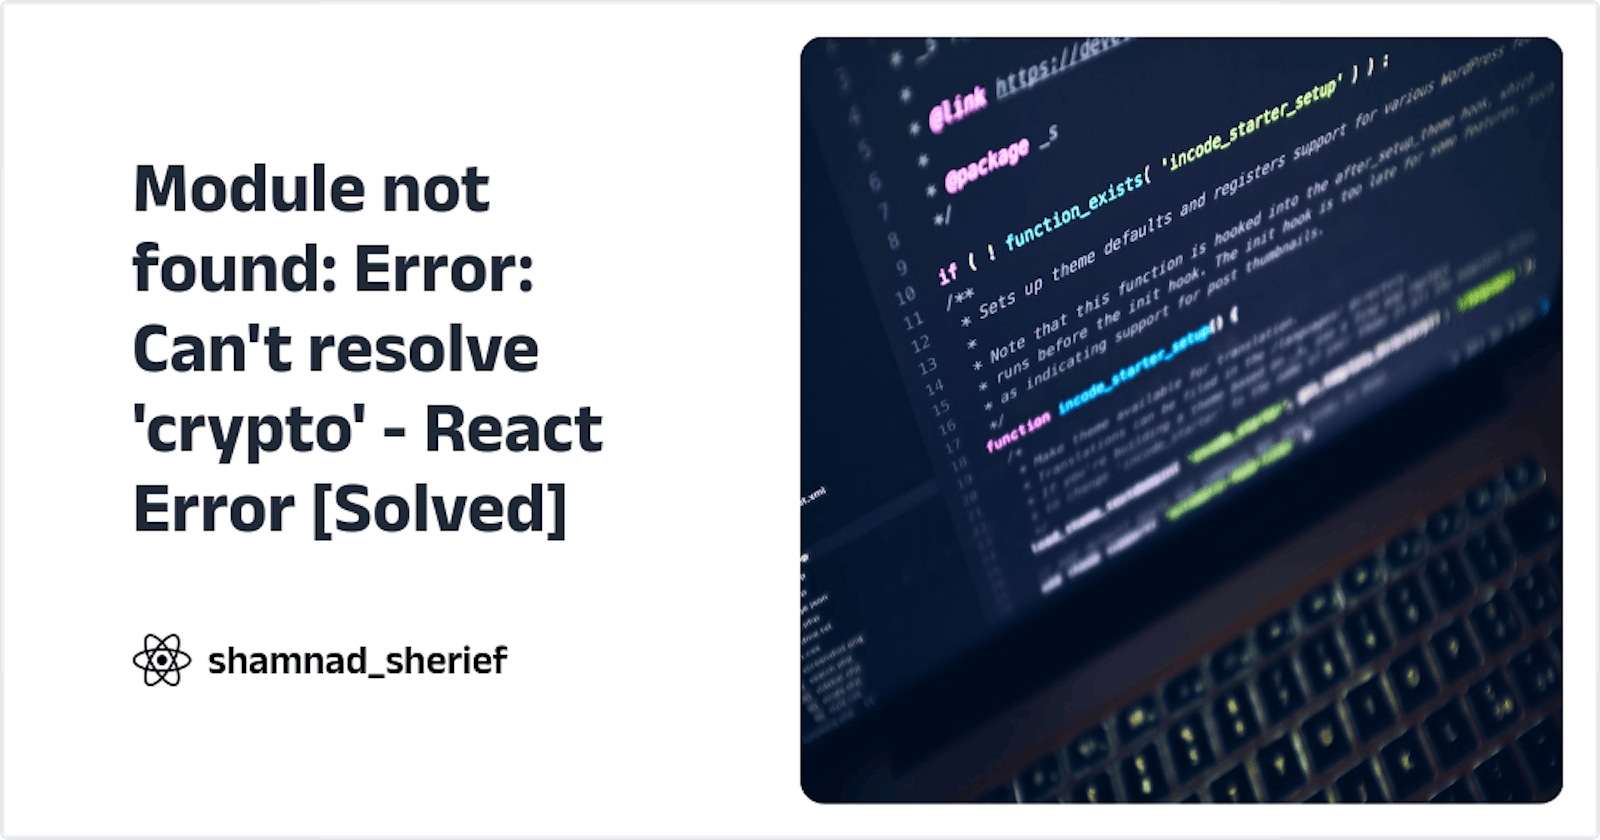 Module not found: Error: Can't resolve 'crypto' - React Error [Solved]